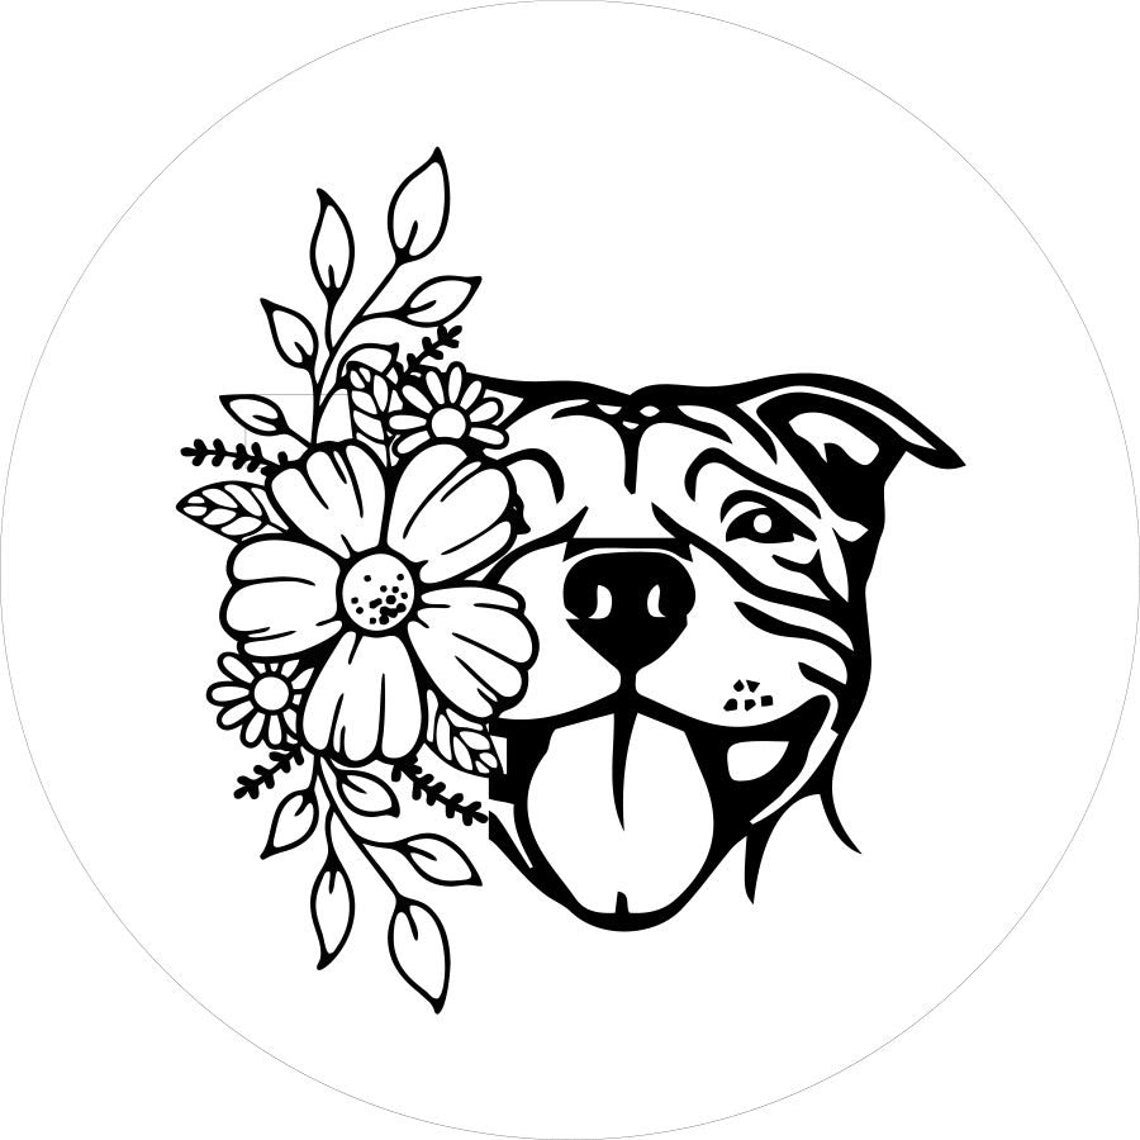 Flowers & Pit Bull Spare Tire Cover Design for Jeep, Bronco, Campers, RV, Trailers, & More